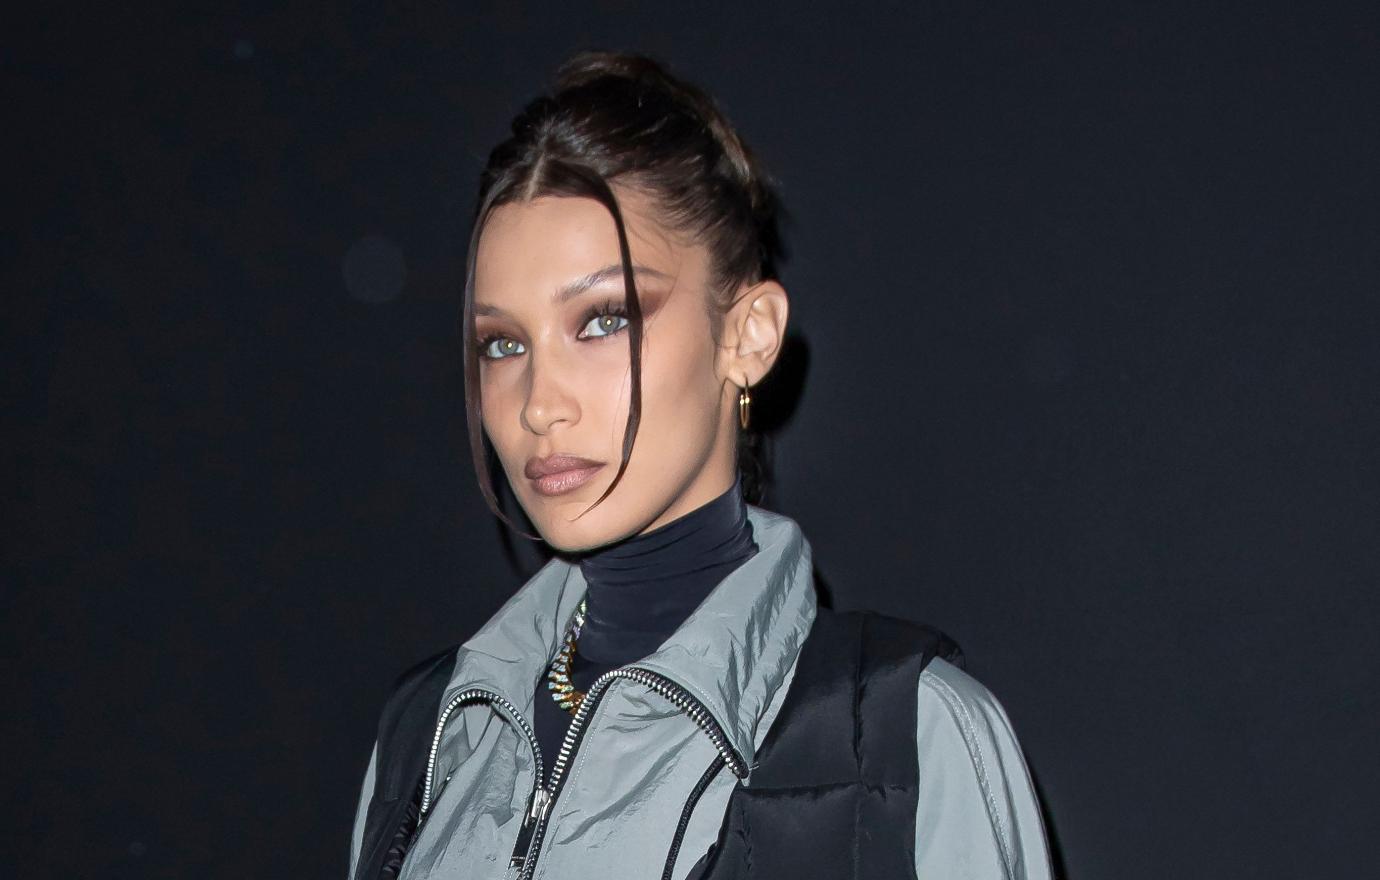 Bella Hadid Shared Her Daily Self-Care Routine